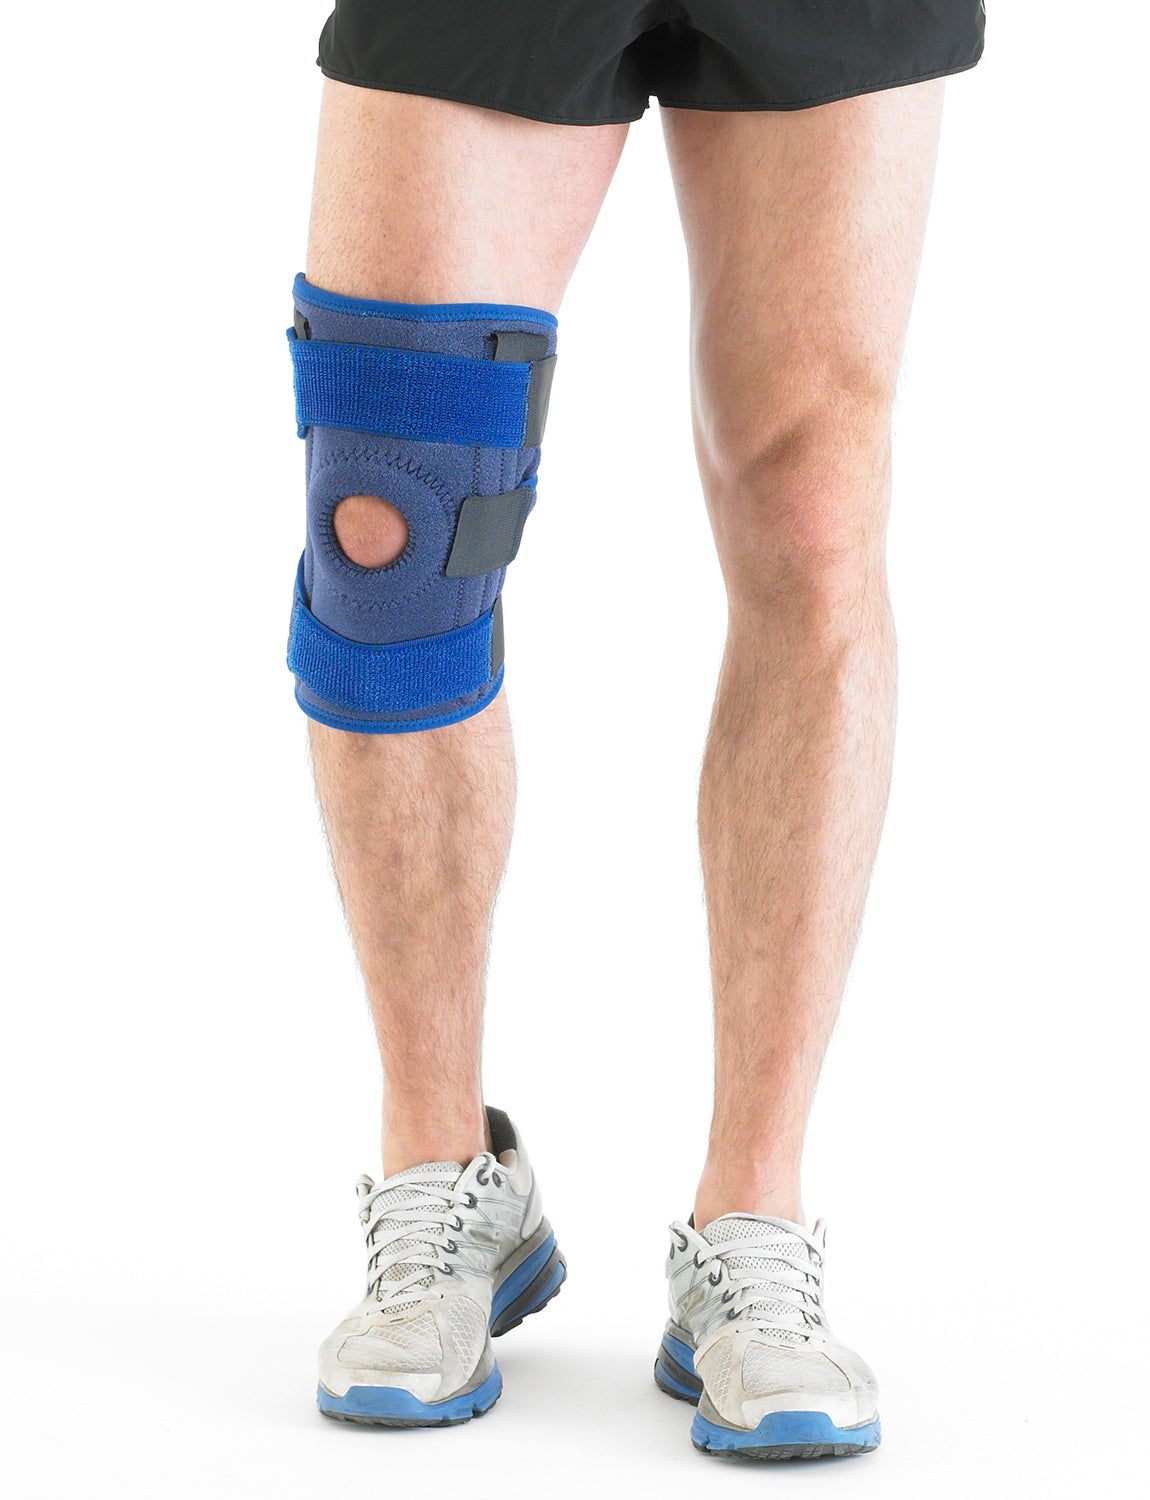 Ovation Medical Neoprene Knee Support with Stabilized Patella